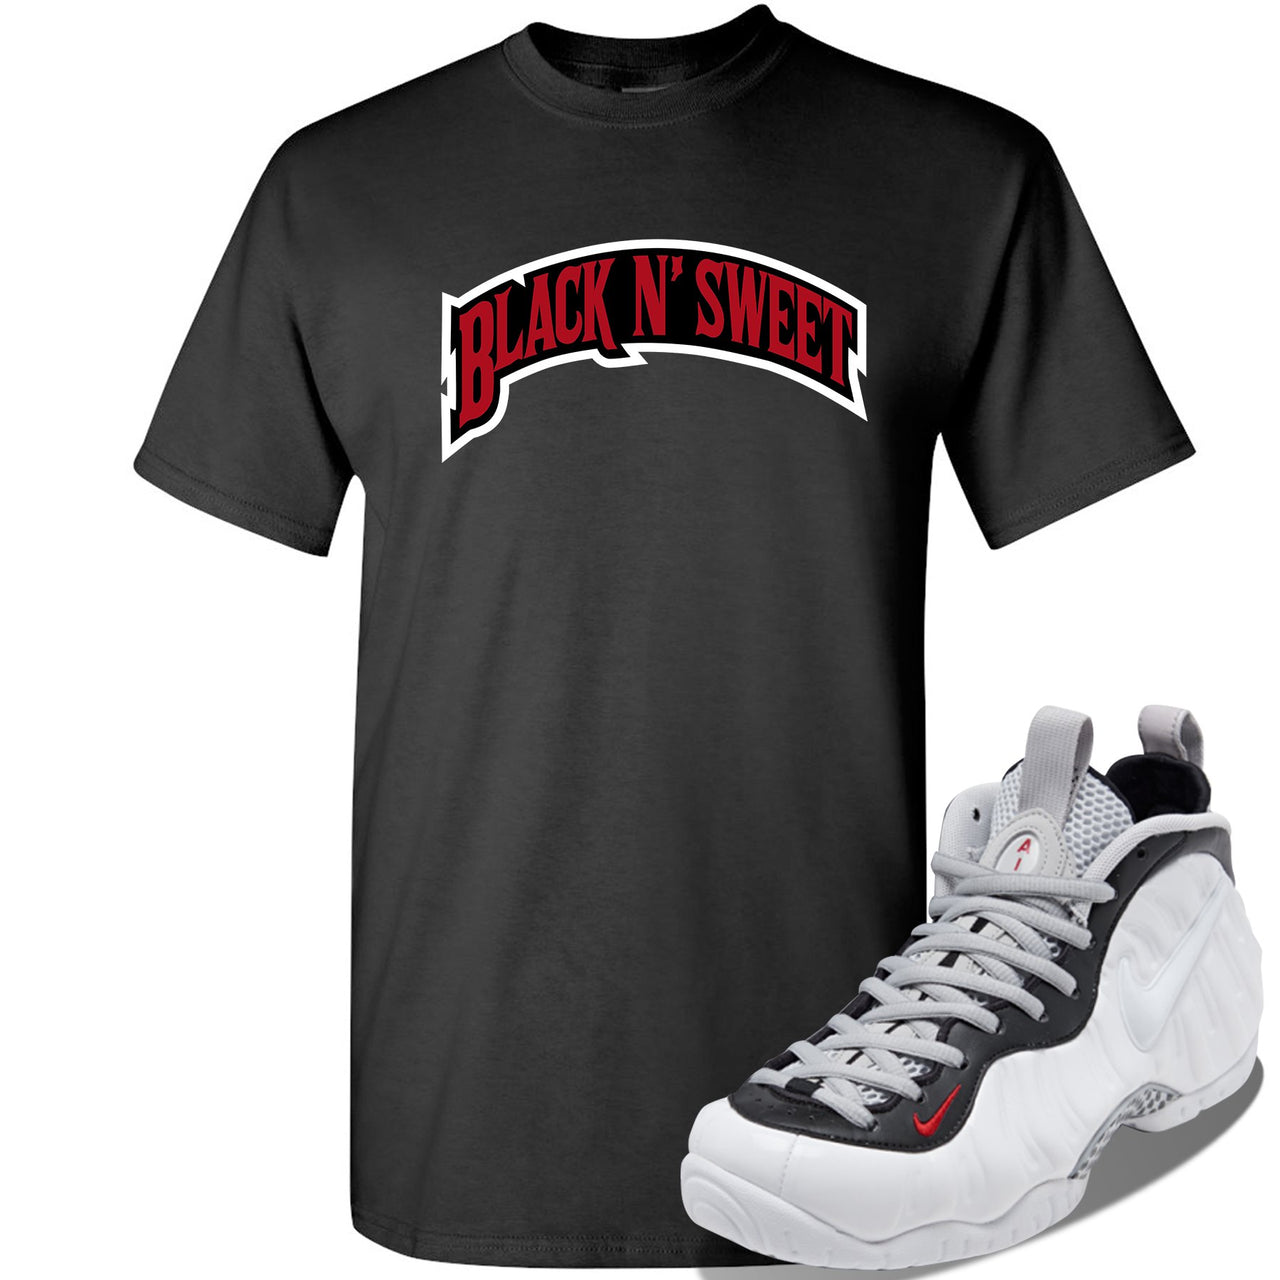 Foamposite Pro White Black University Red Sneaker Black T Shirt | Tees to match Nike Air Foamposite Pro White Black University Red Shoes | Black N Sweet Arch